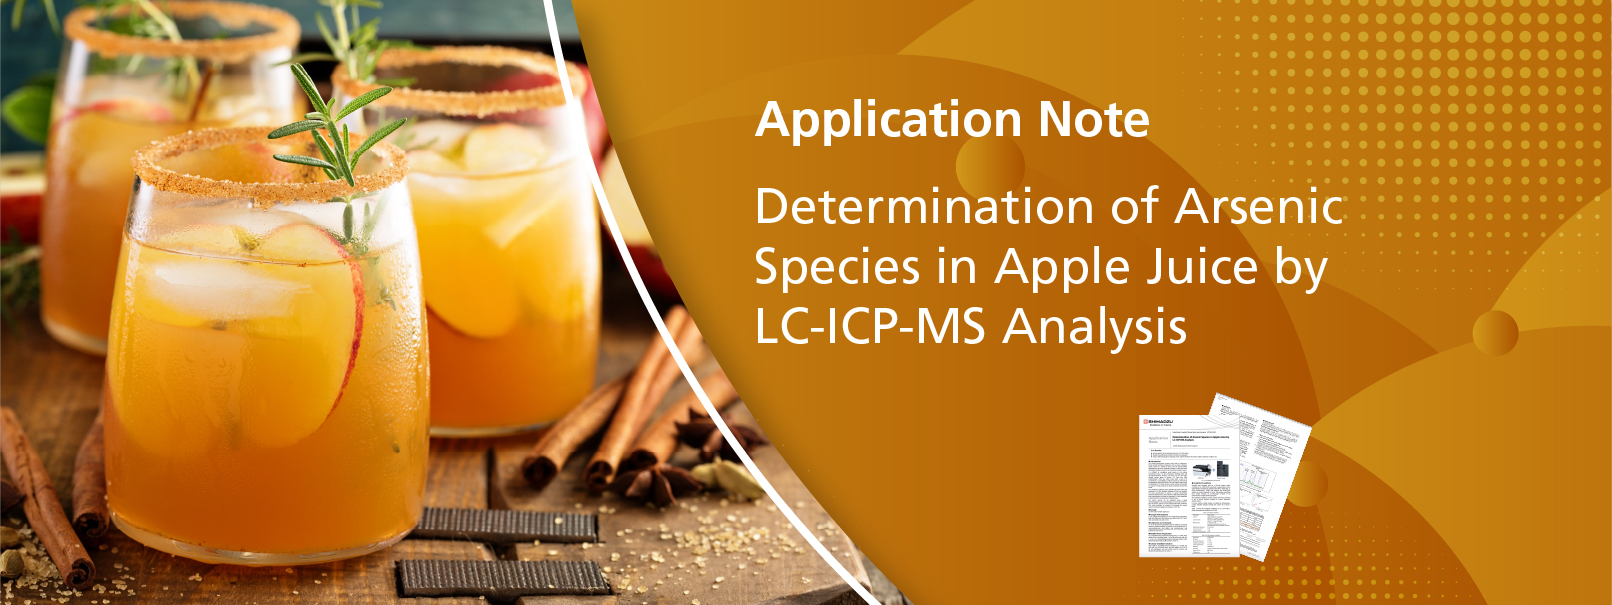 Determination of Arsenic Species in Apple Juice by LC-ICP-MS Analysis